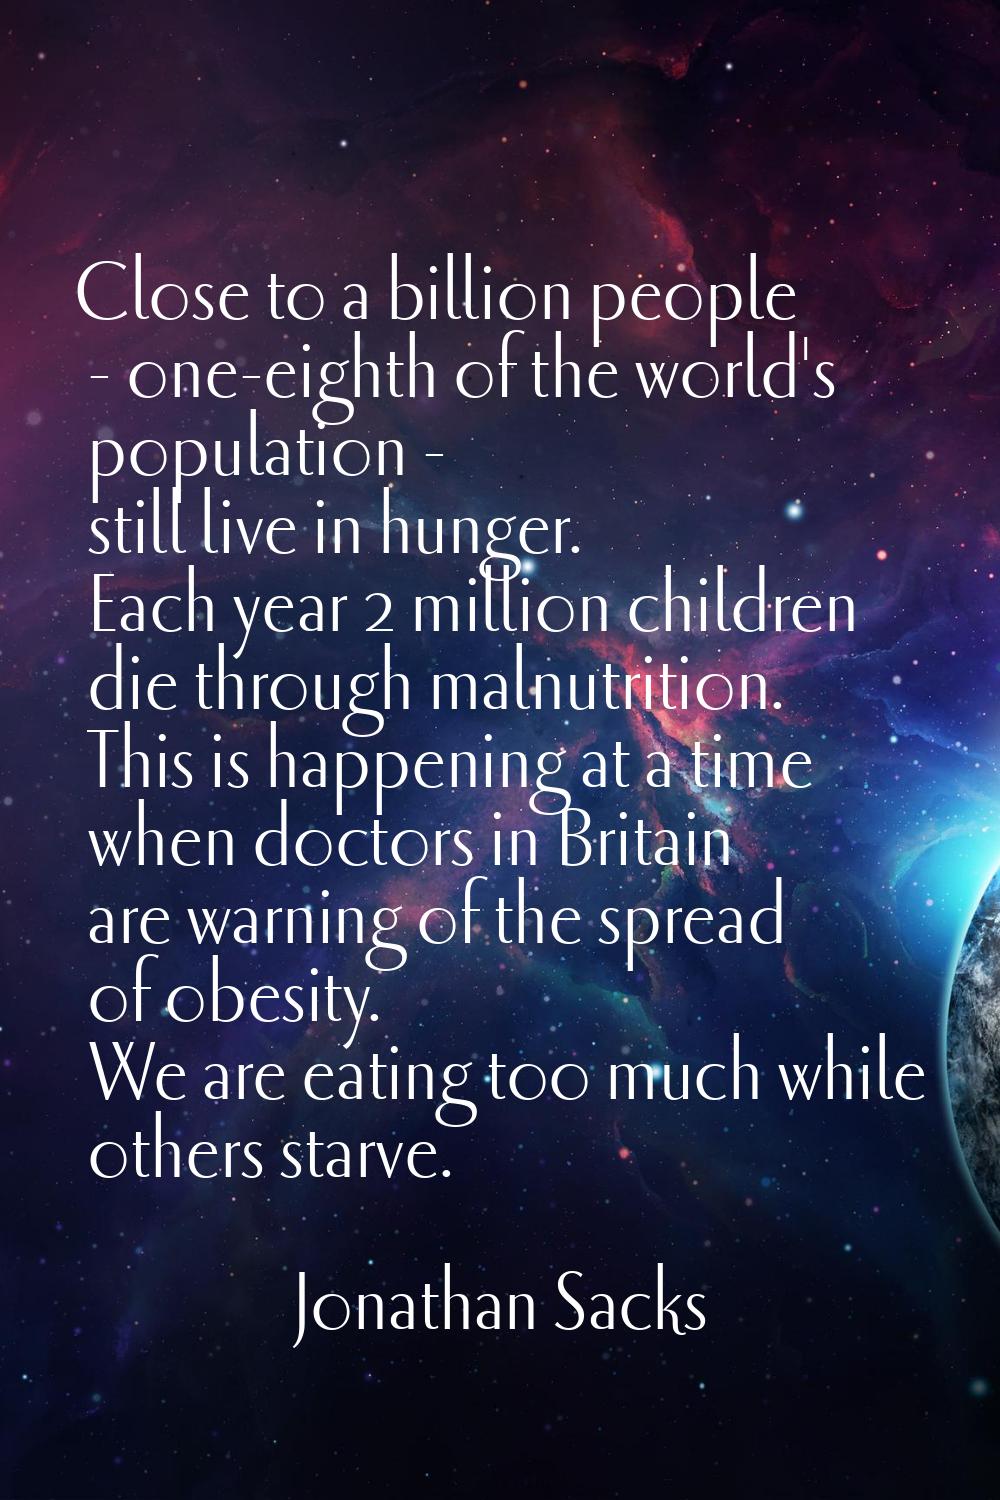 Close to a billion people - one-eighth of the world's population - still live in hunger. Each year 